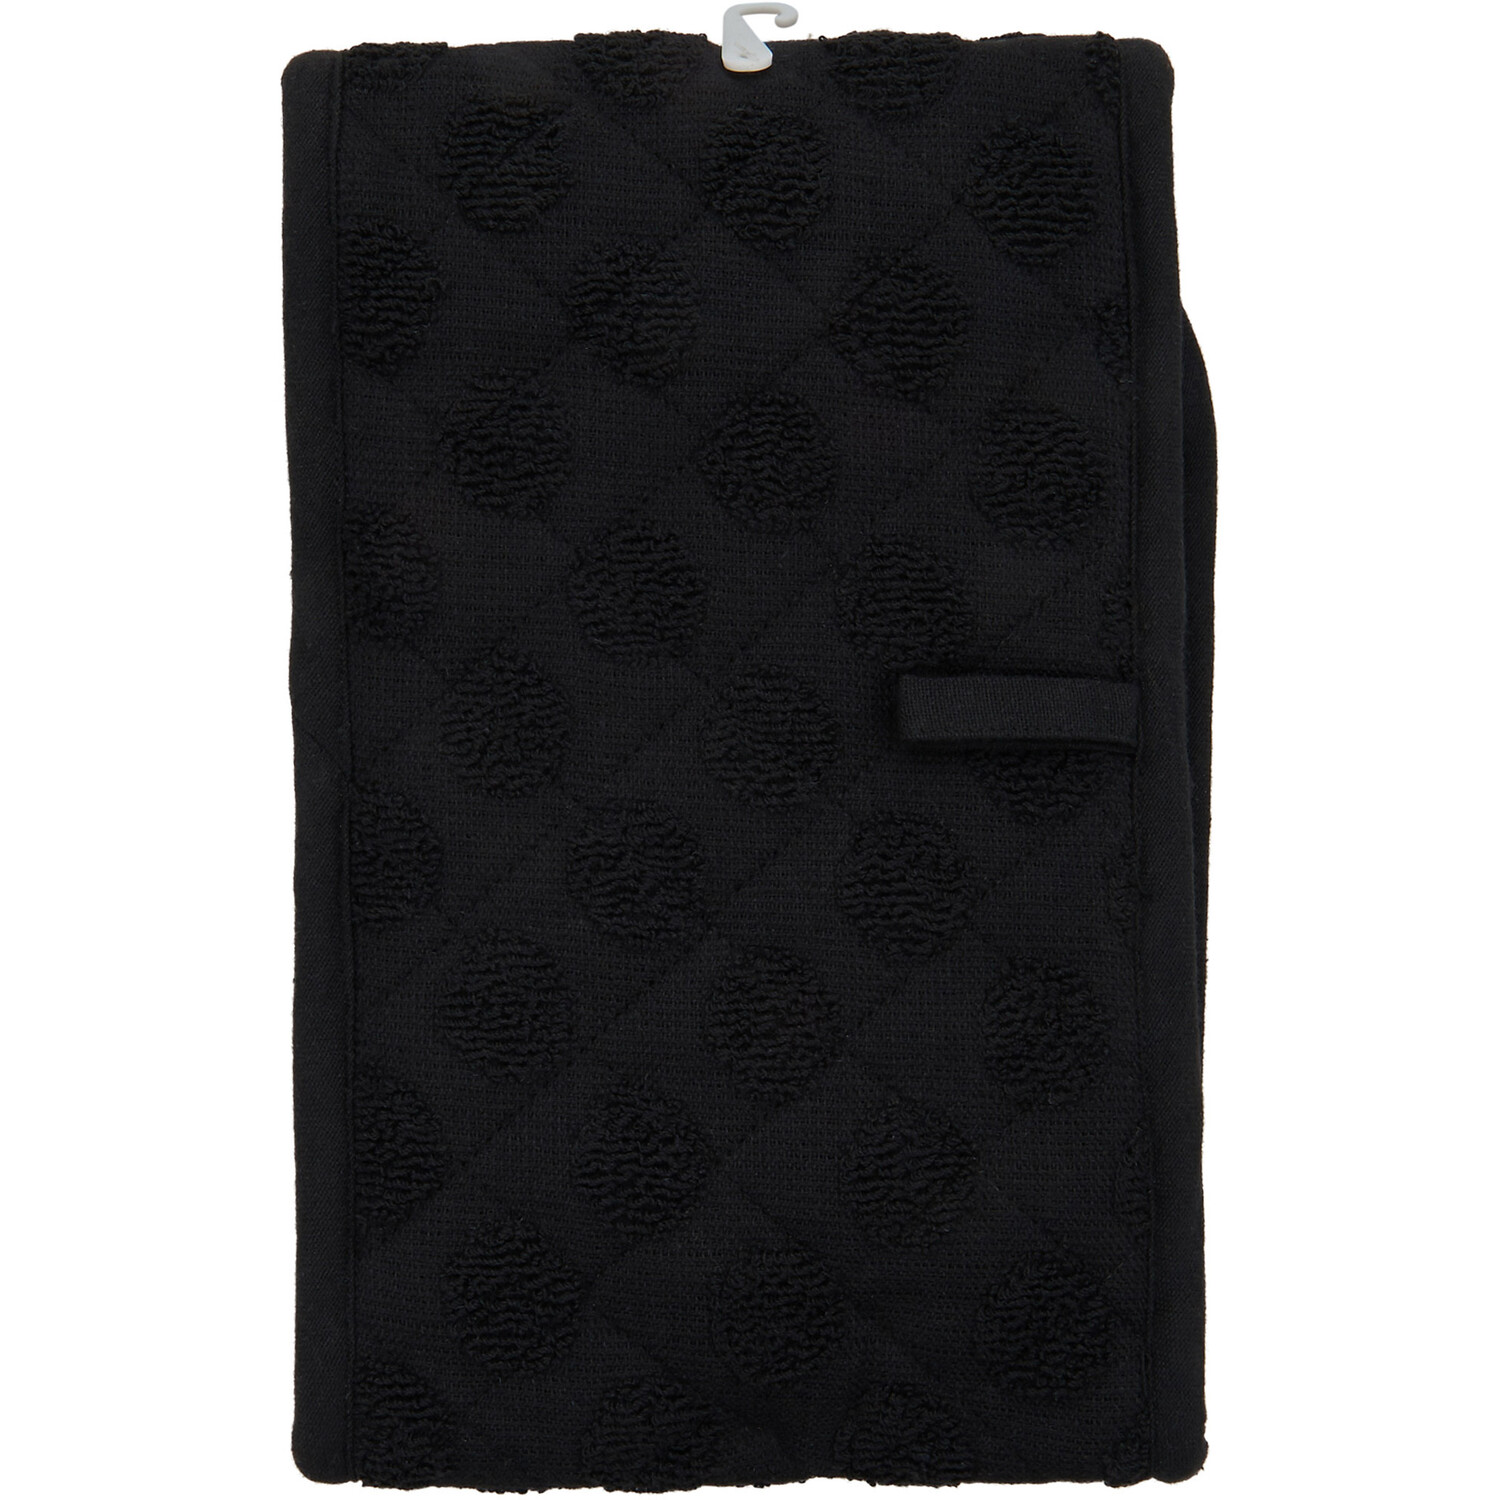 Dobby Terry Double Oven Glove - Black Image 2